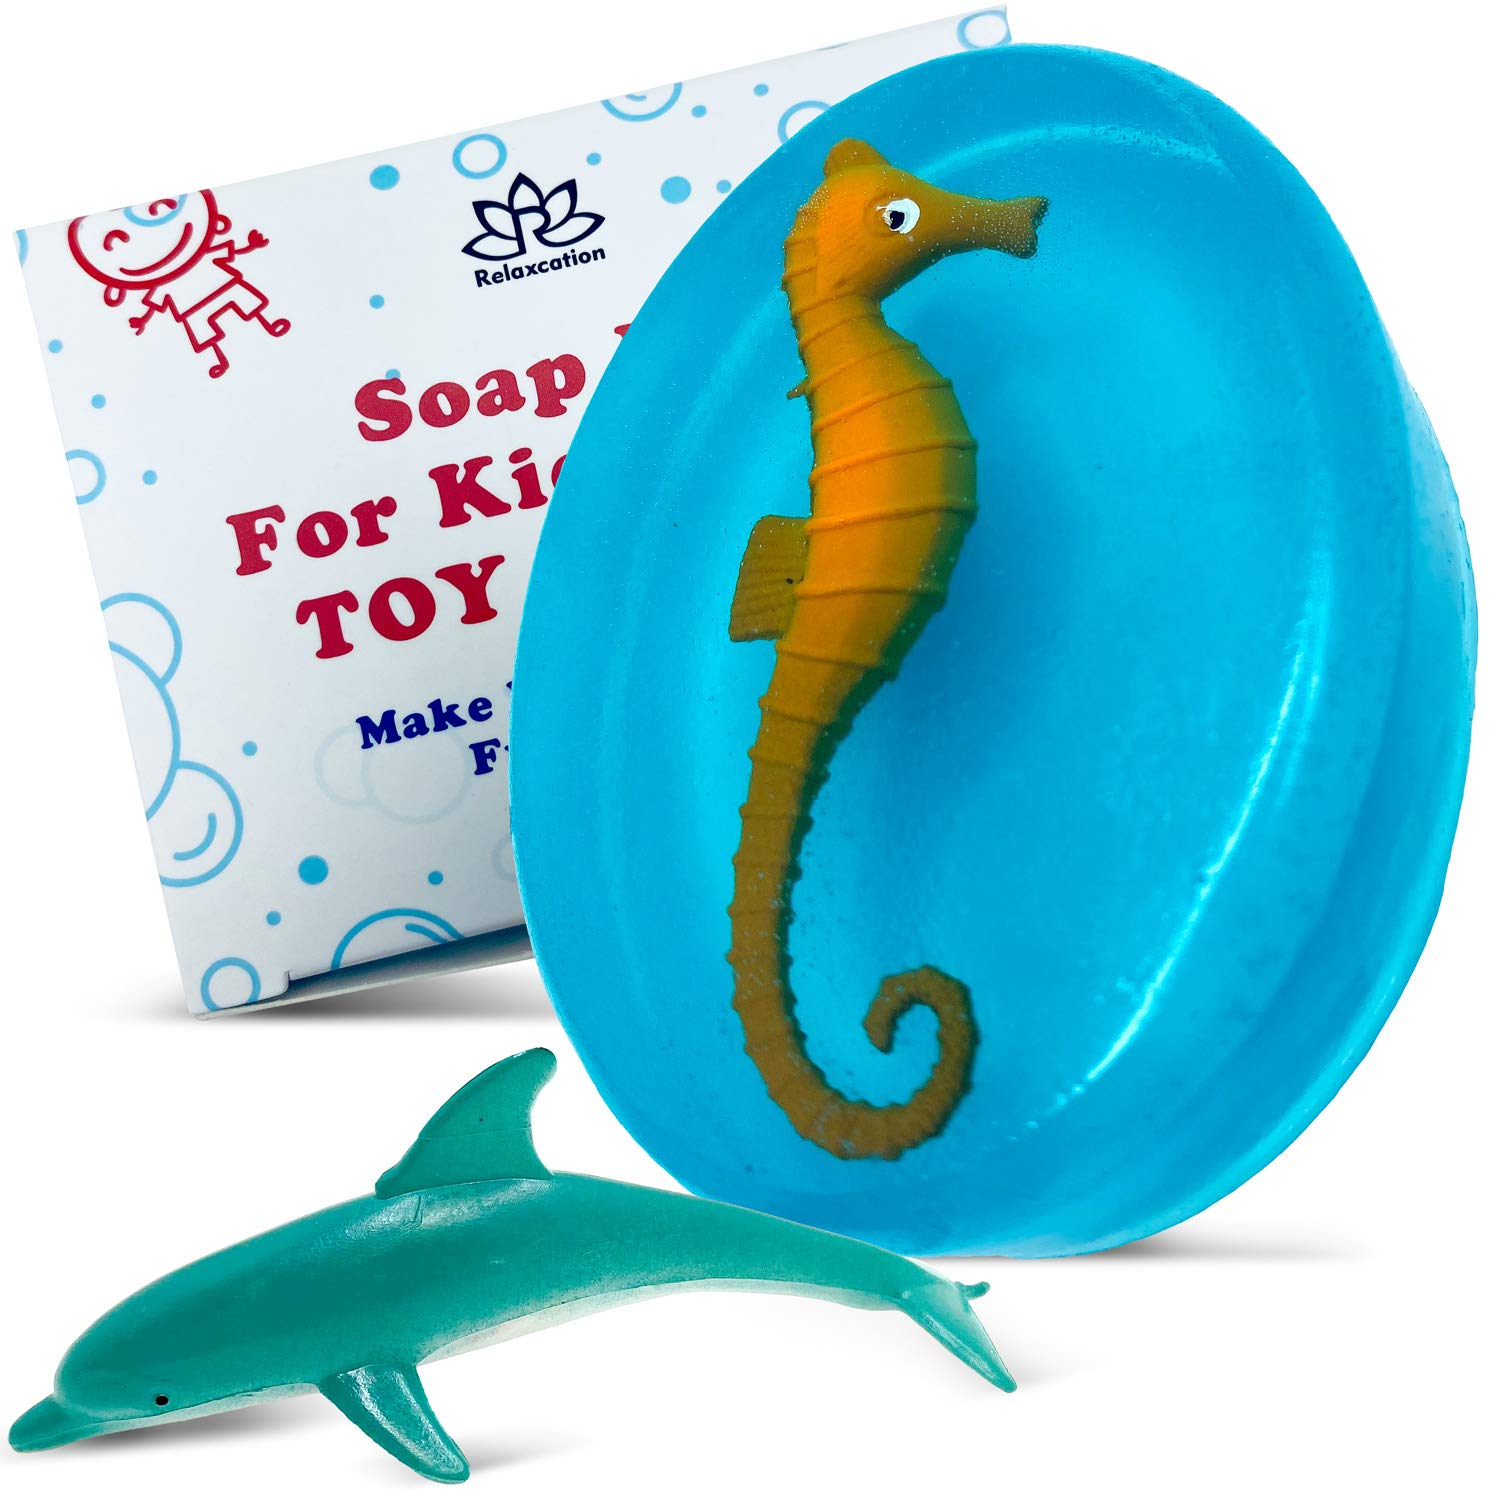 Soap Bar For Kids with Toy SEA ANIMALS Inside - Sweet SEA SHARK Scent and Blue Color